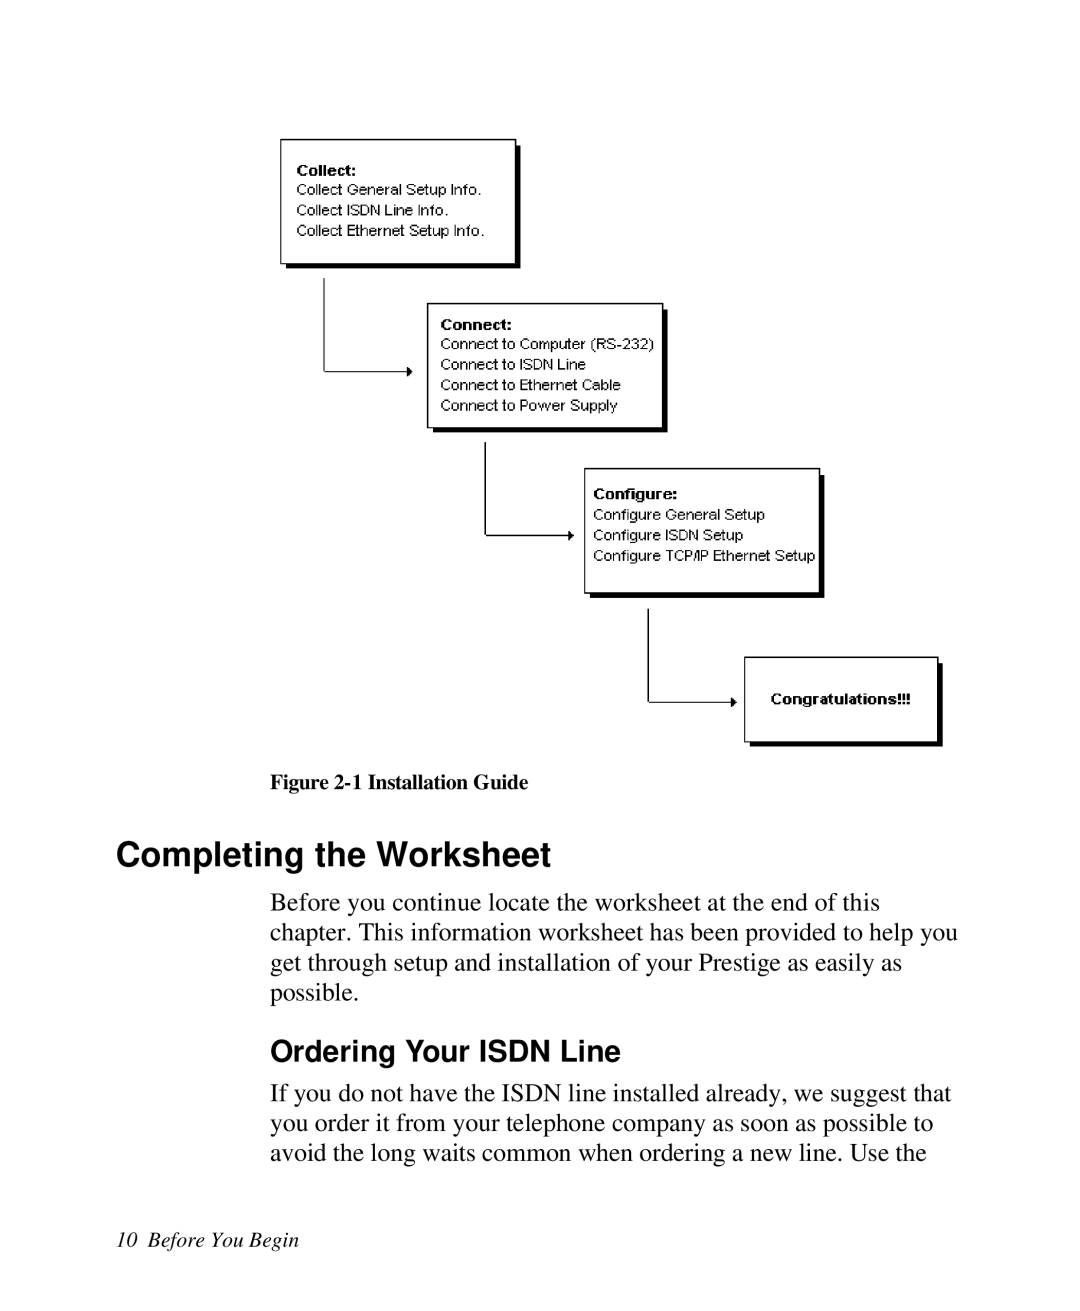 ZyXEL Communications Prestige100 user manual Completing the Worksheet, Ordering Your ISDN Line 